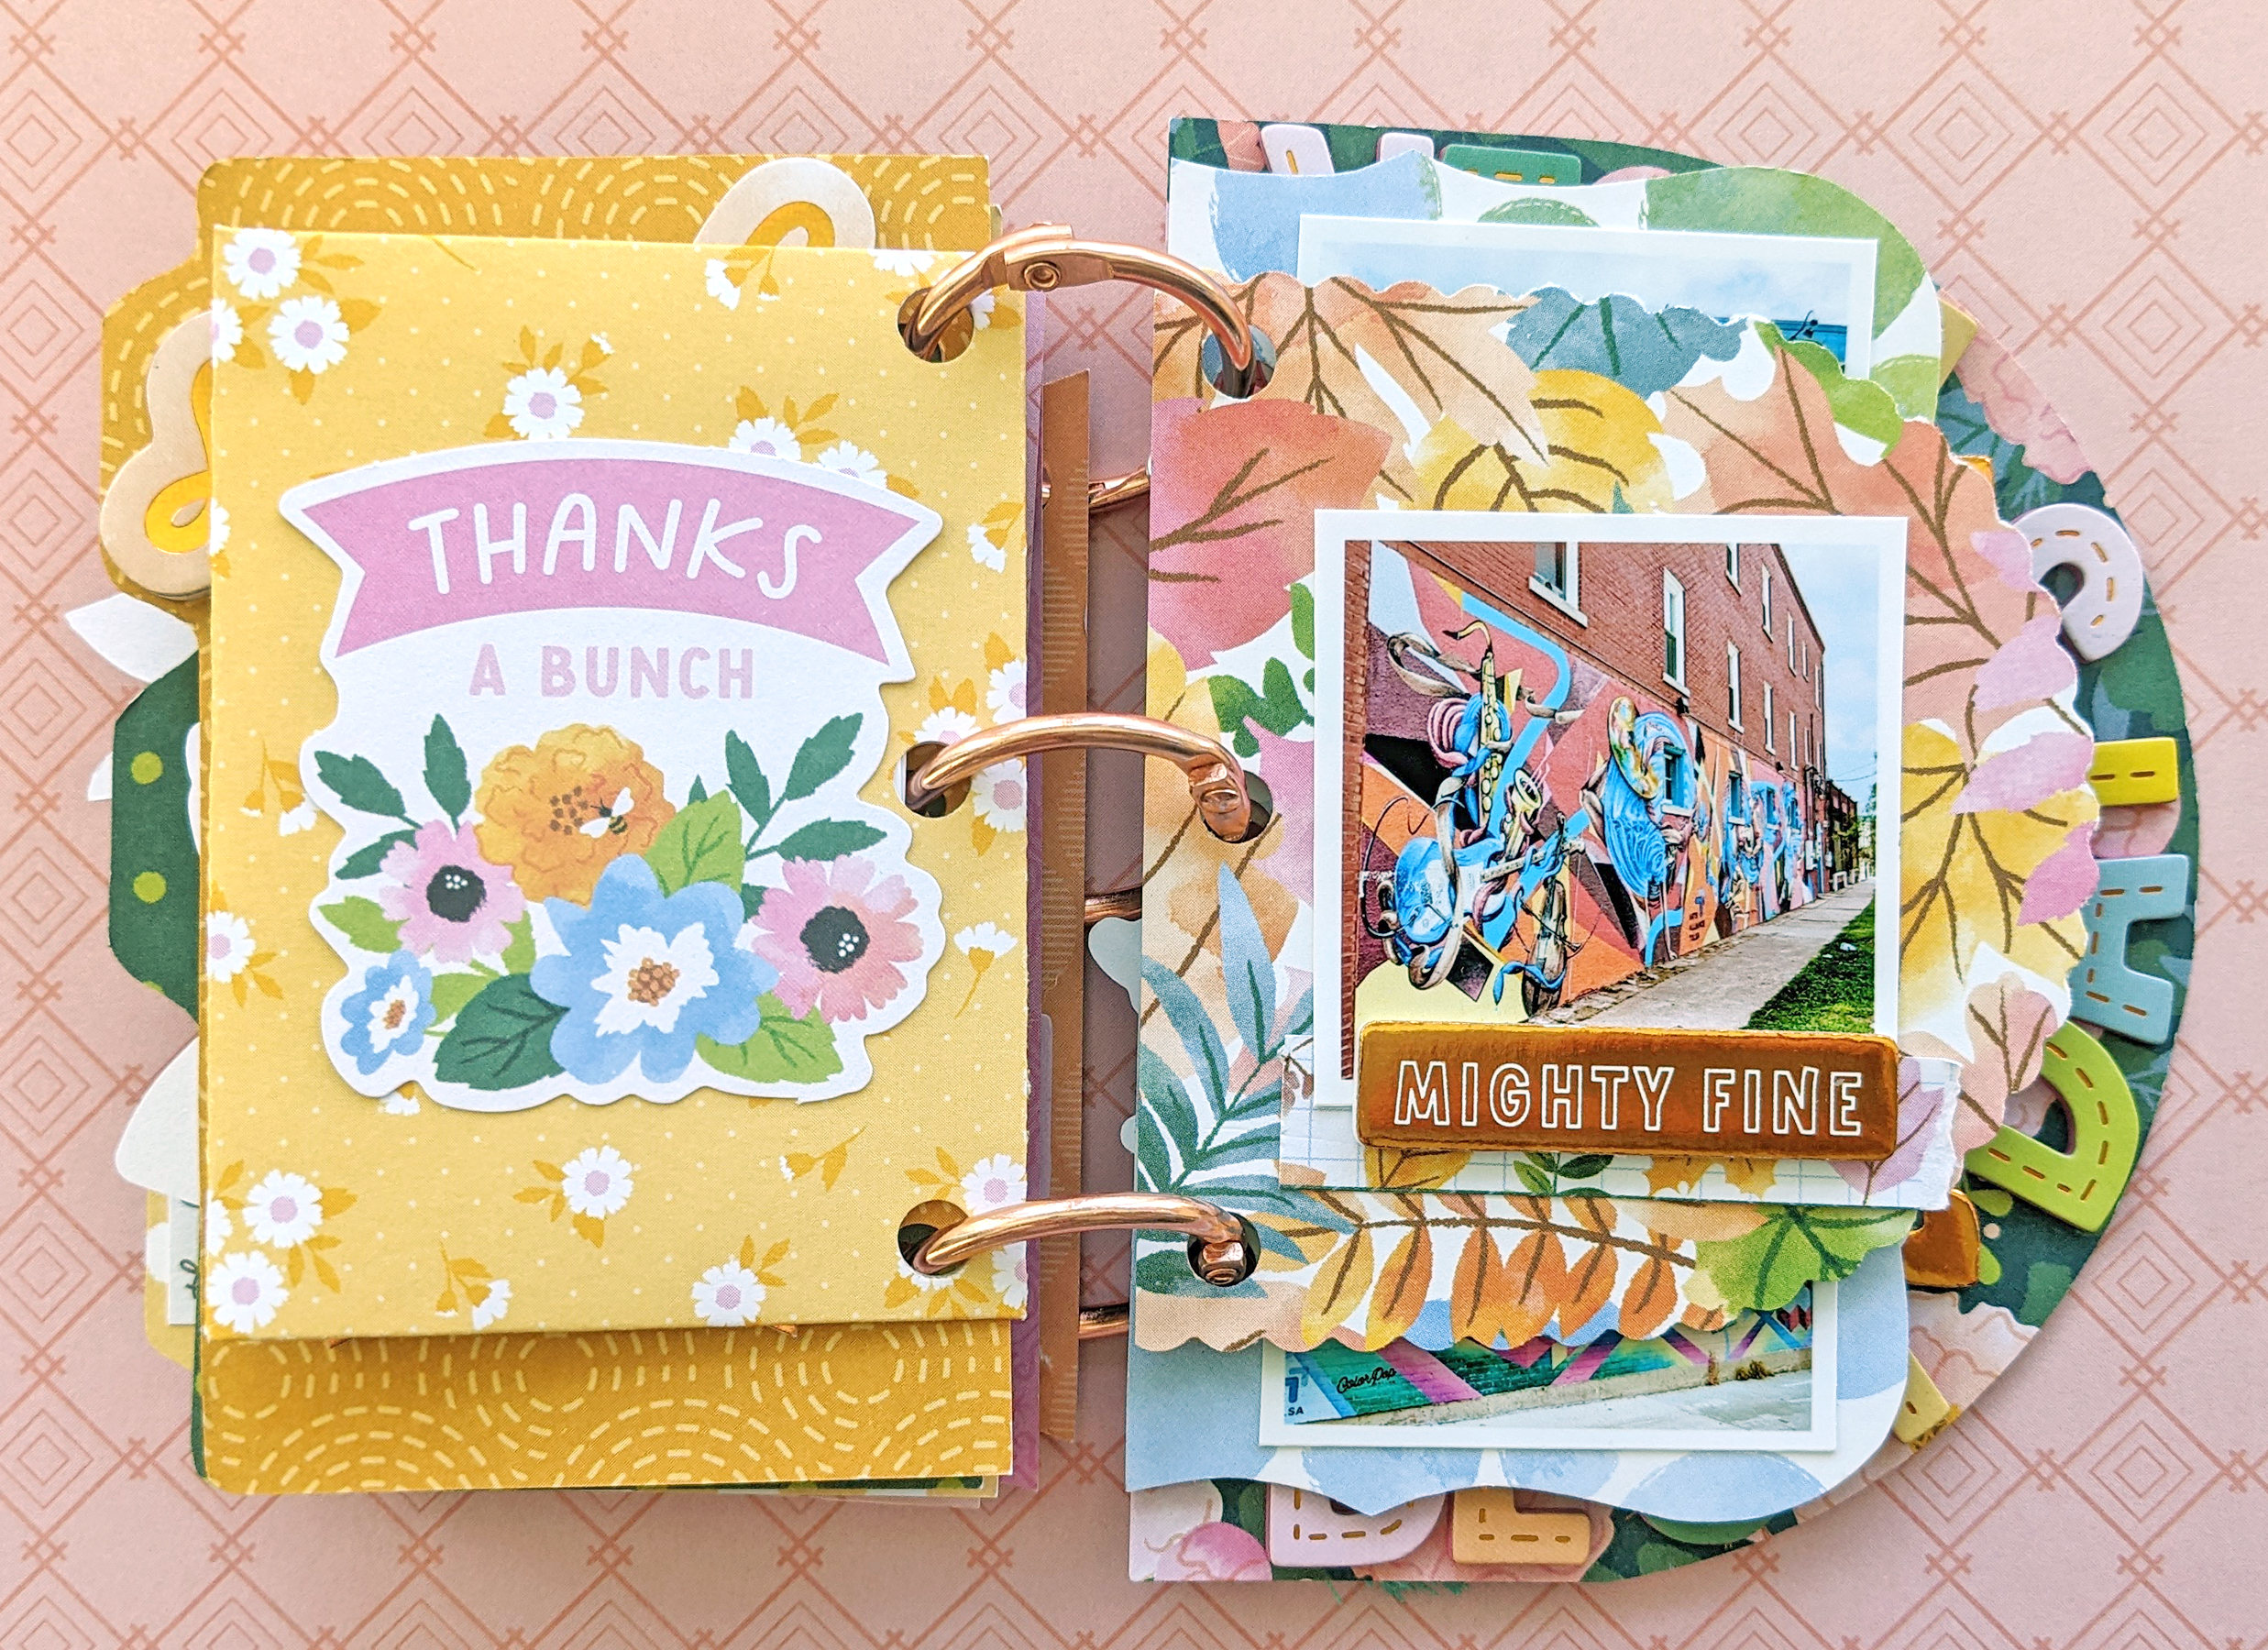 Mini Scrapbook Album with mixed sized pages – Sunday L Designs.com